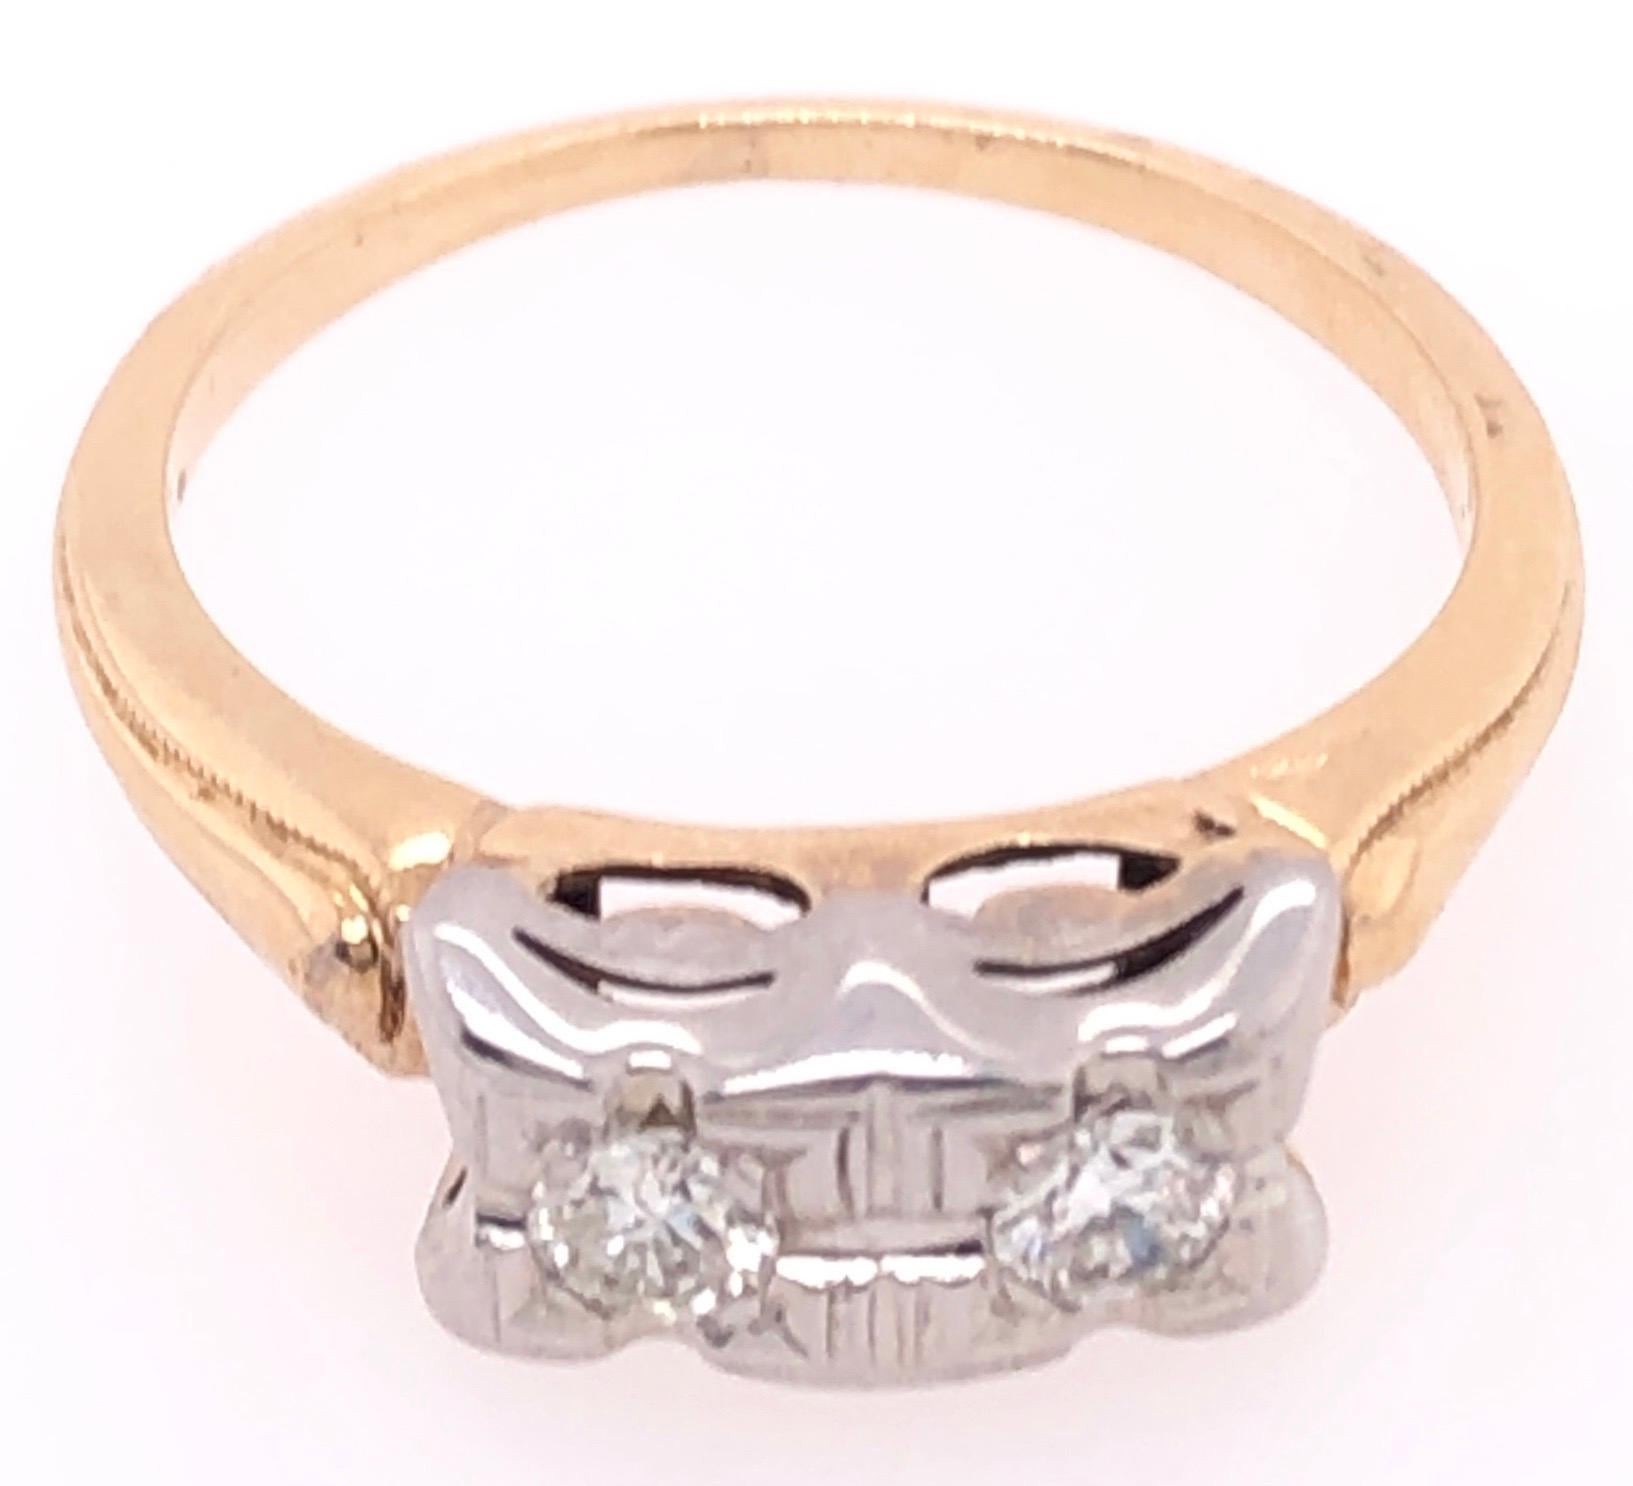 14 Karat Two Tone Fashion Ring with Diamonds 0.25 Total Diamond Weight.
Size 6
2.72 grams total weight.